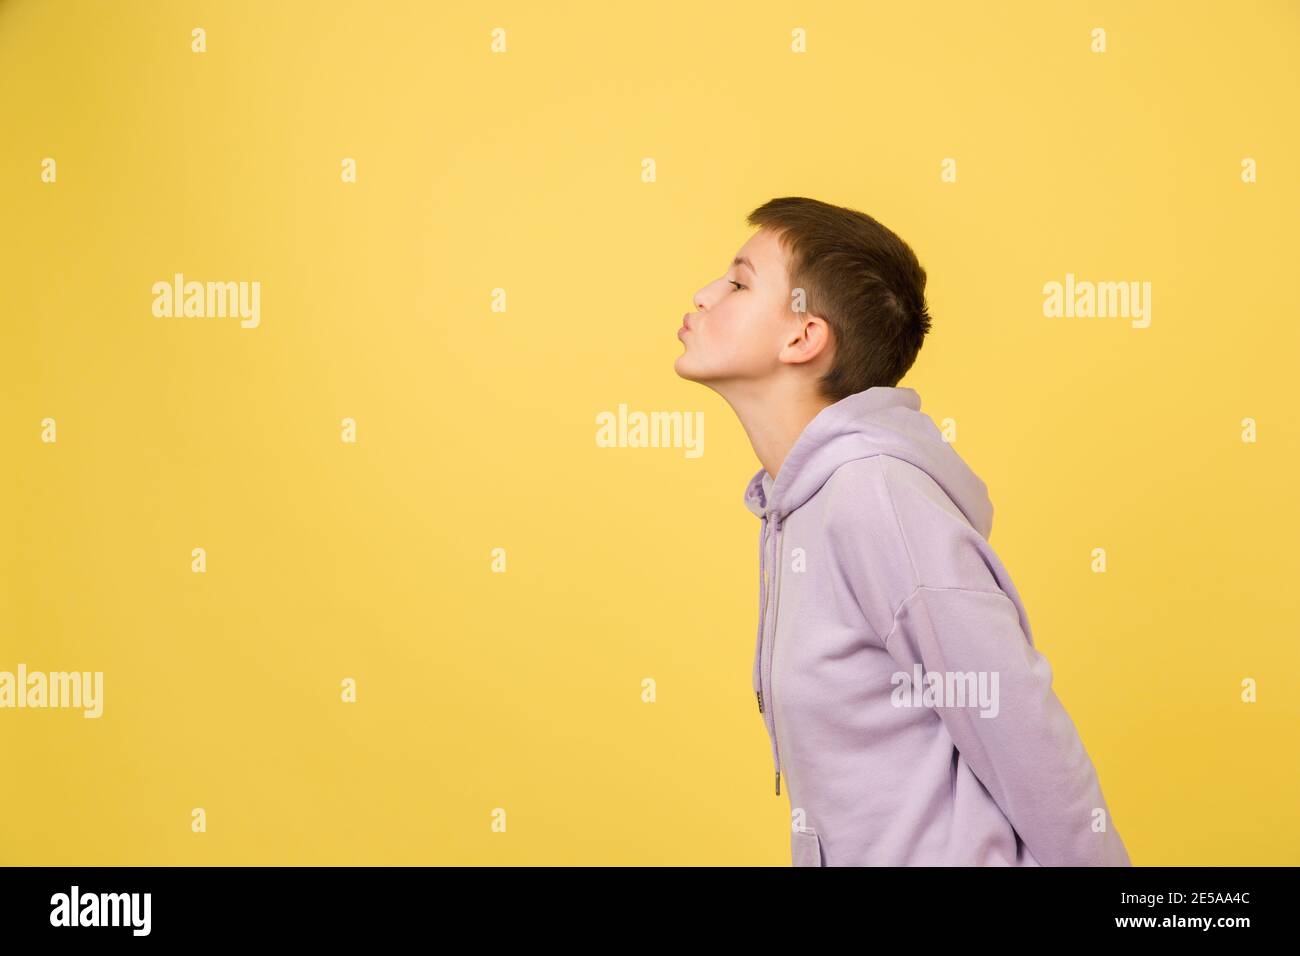 Kissing, sending kisses. Caucasian girl's portrait isolated on yellow background with copyspace. Beautiful female model in hoodie. Concept of human emotions, facial expression, sales, ad, fashion. Stock Photo